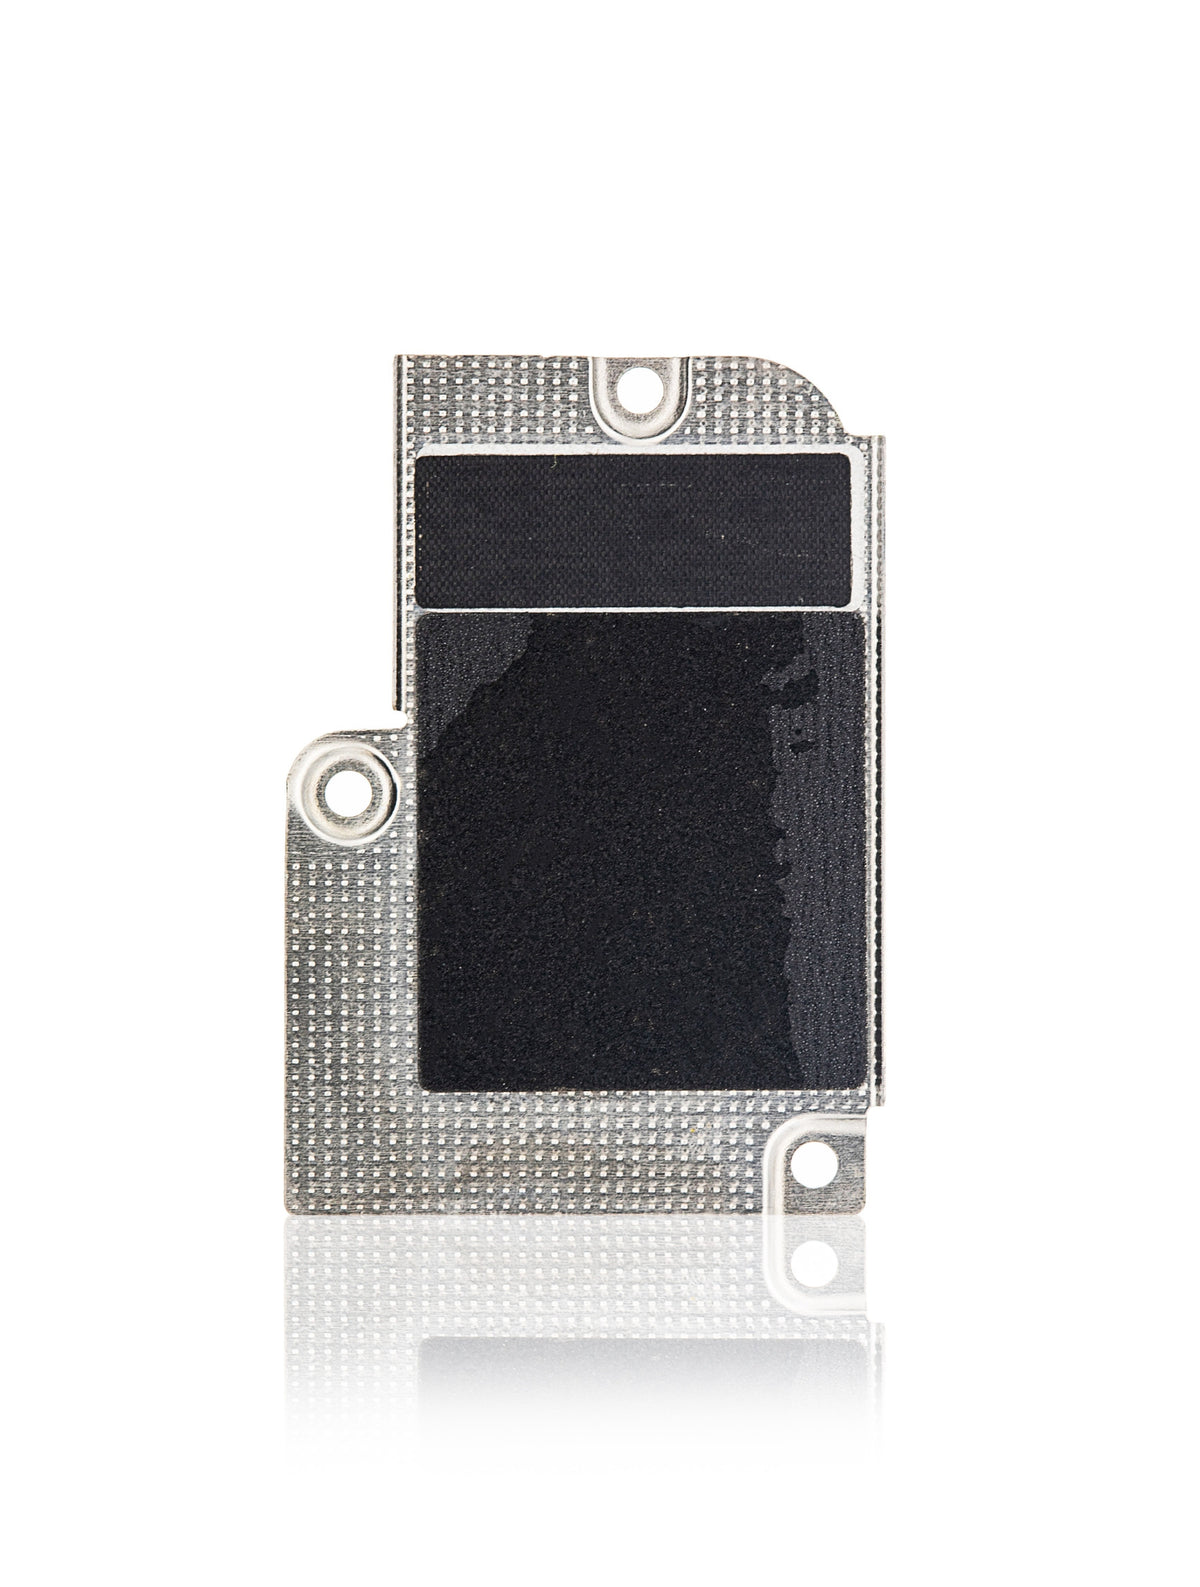 LCD CABLE HOLDING BRACKET COMPATIBLE WITH IPAD AIR 2